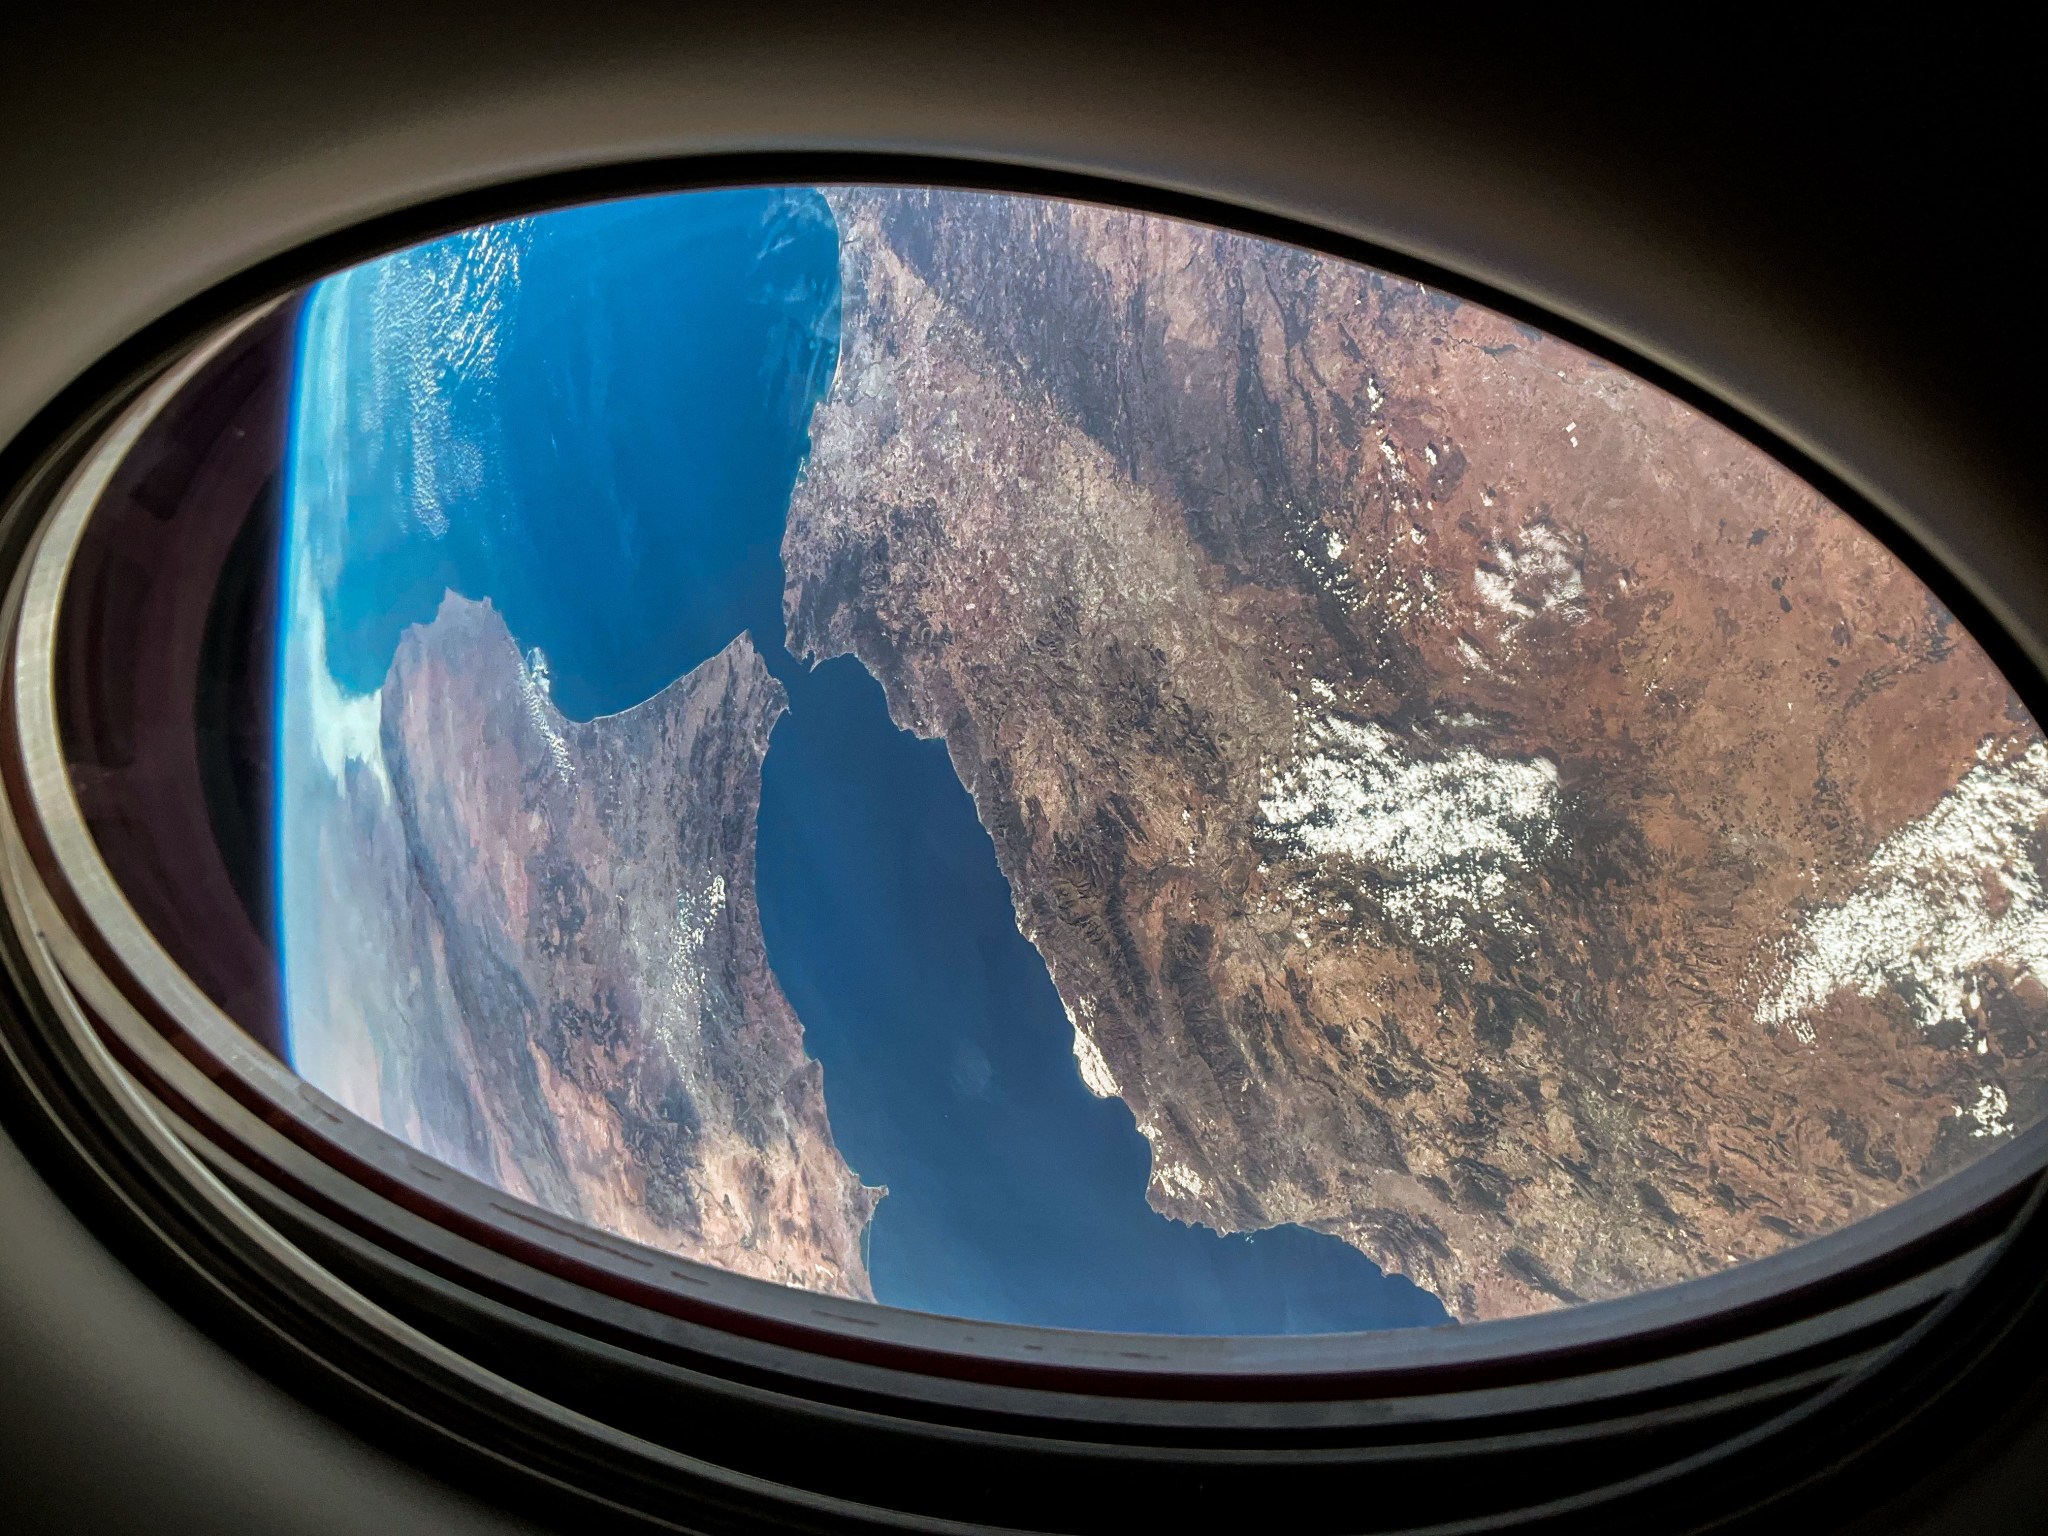 This view of Earth was captured from a window on the SpaceX Dragon Endurance spacecraft as it approached the International Space Station. Pictured below is the Strait of Gibraltar that connects the Atlantic Ocean to the Mediterranean Sea, which separates the continents of Europe and Africa.